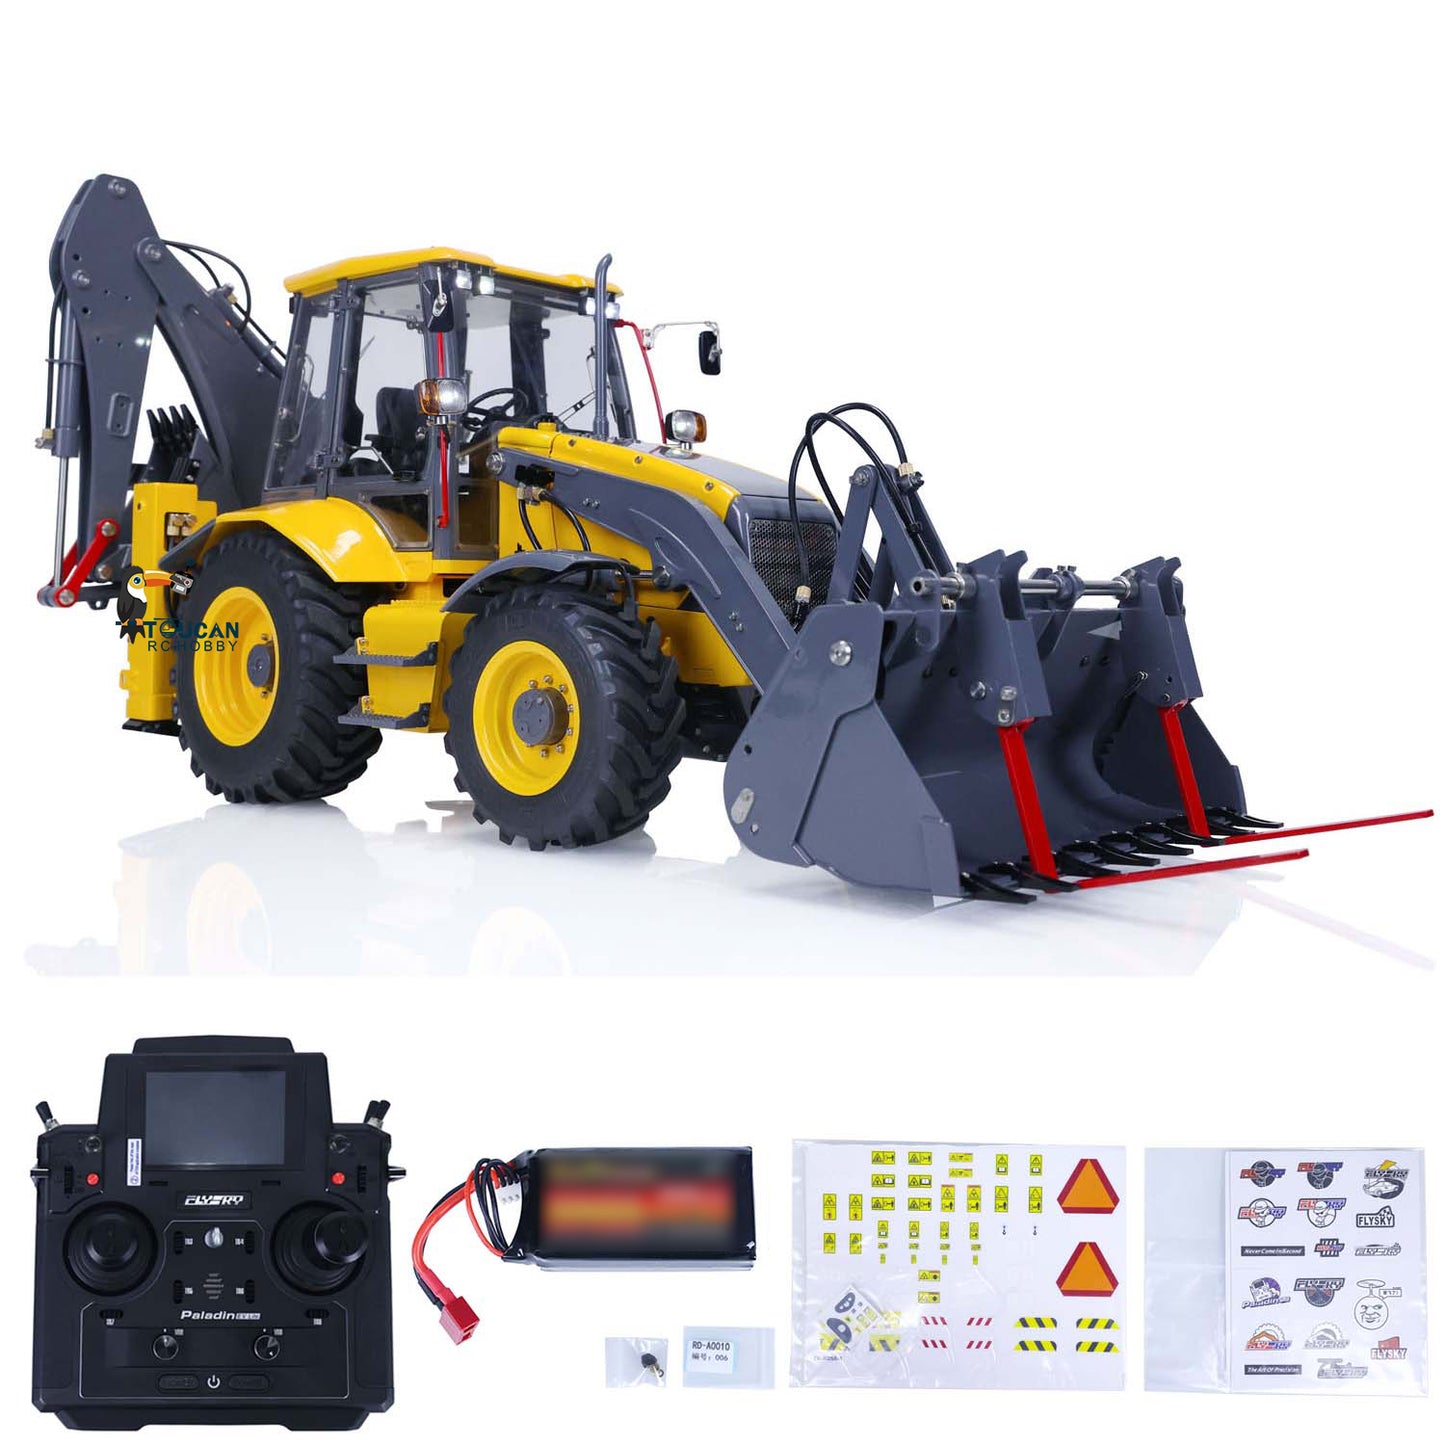 LESU 1/14 Metal Hydraulic RC Backhoe Loader AOUE BL71 2 in 1 Electric Excavator Ready To Run Version Battery Light Sound Sytem